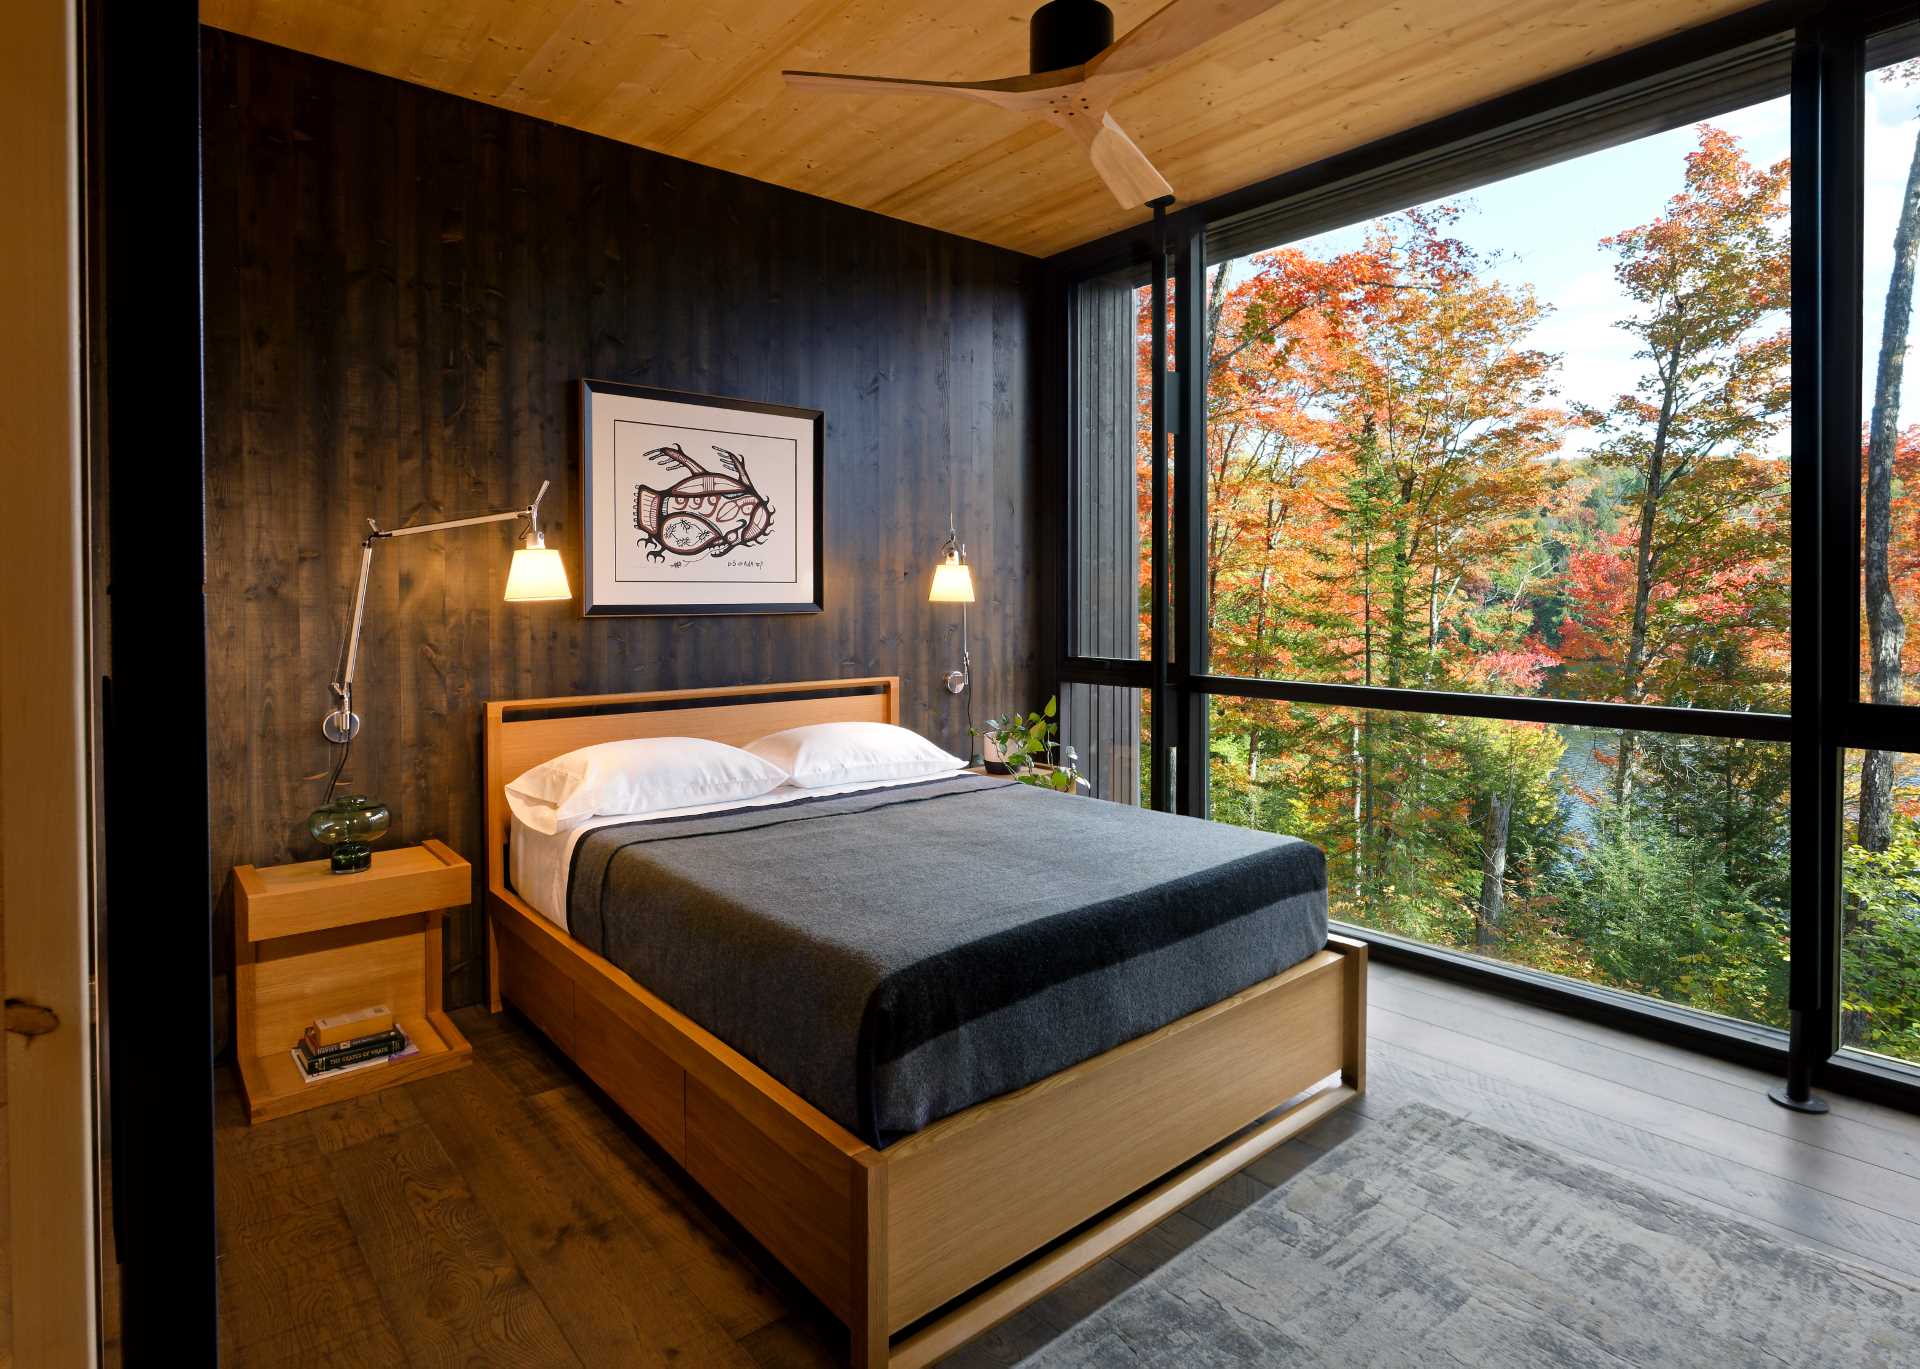 A modern bedroom with a dark wood accent wall.